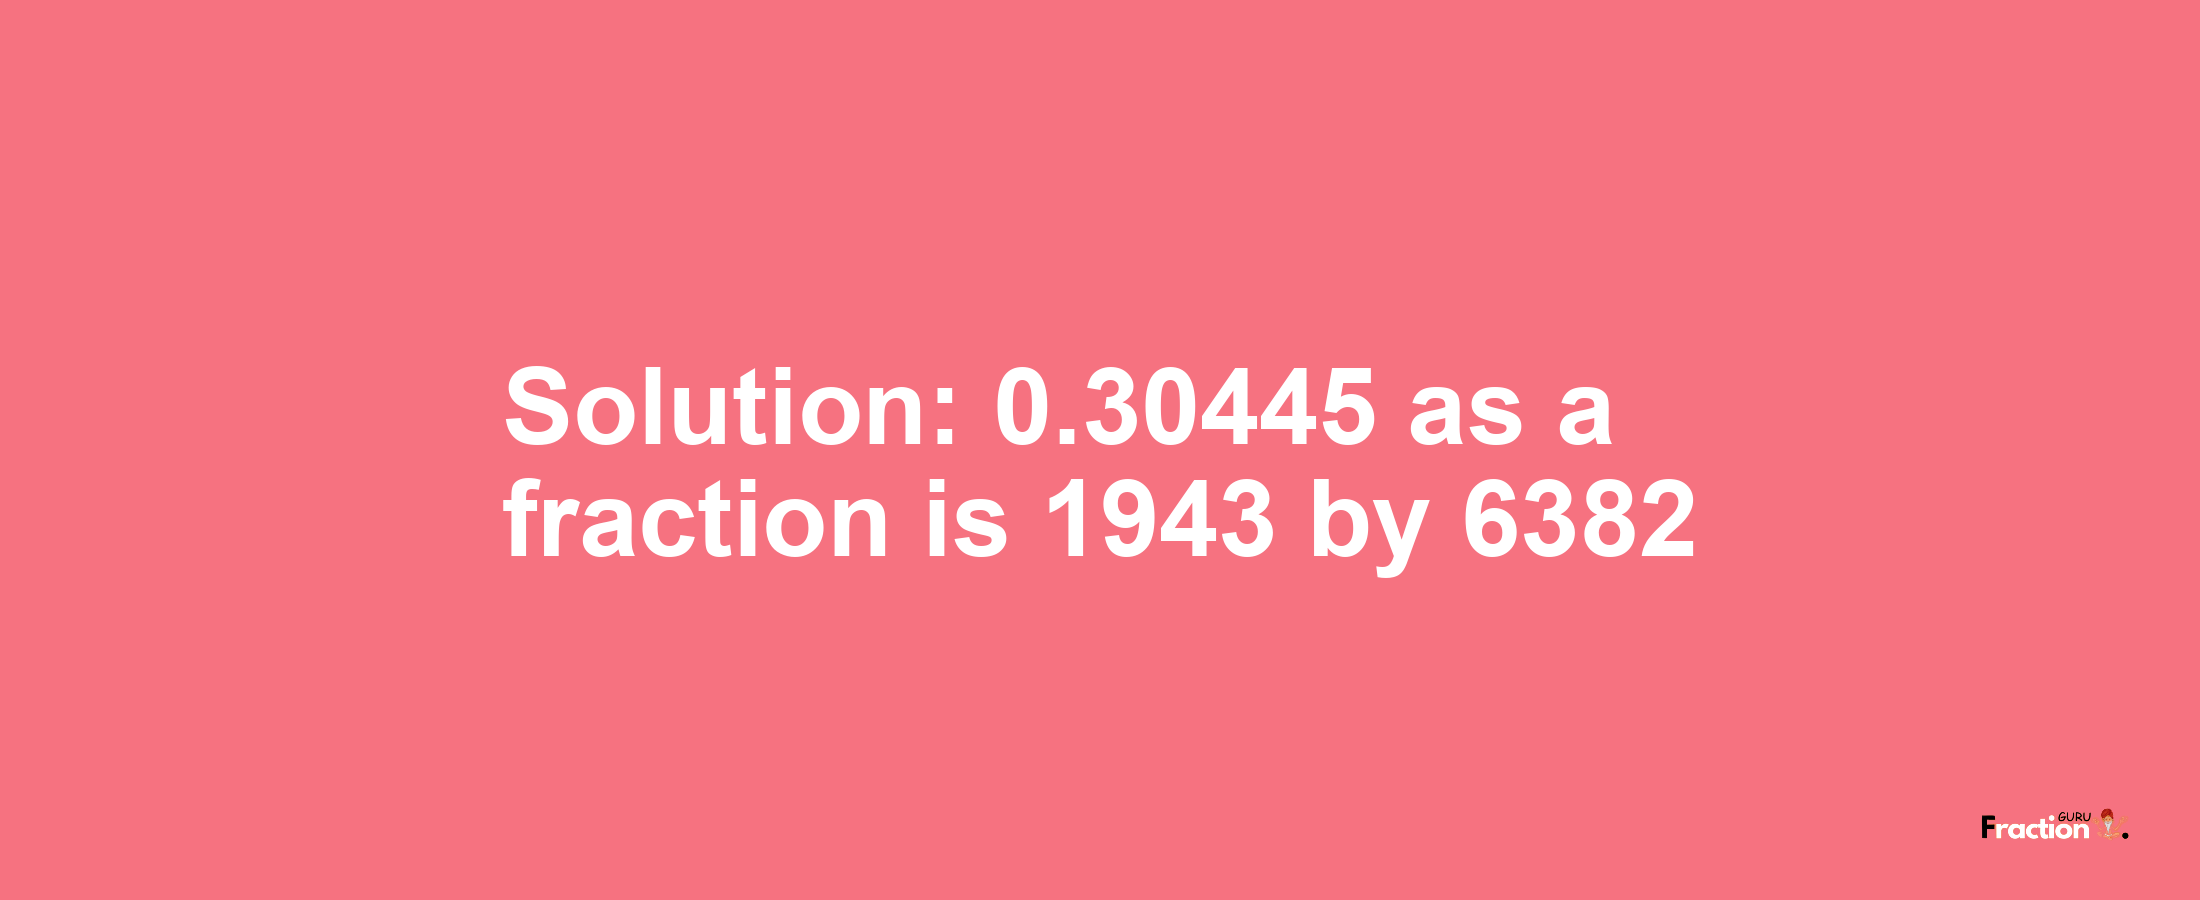 Solution:0.30445 as a fraction is 1943/6382